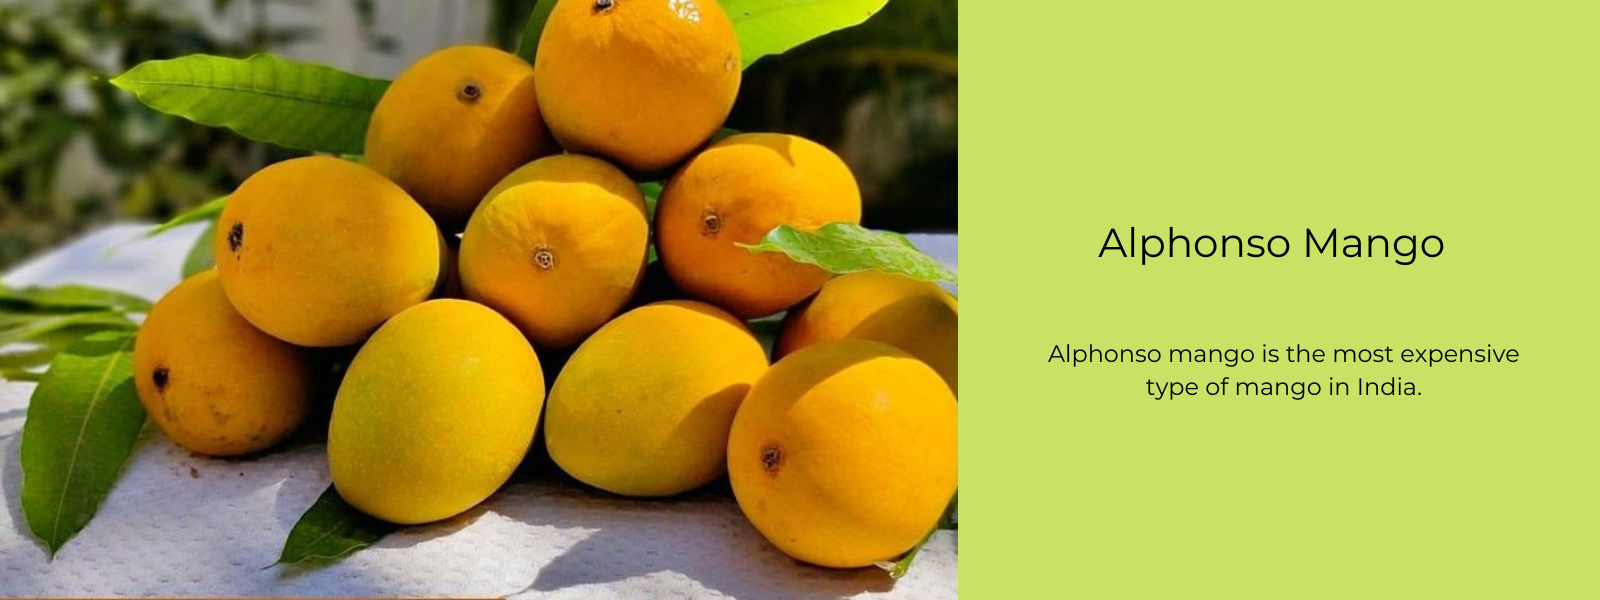 Alphonso Mango - Health Benefits, Uses and Important Facts